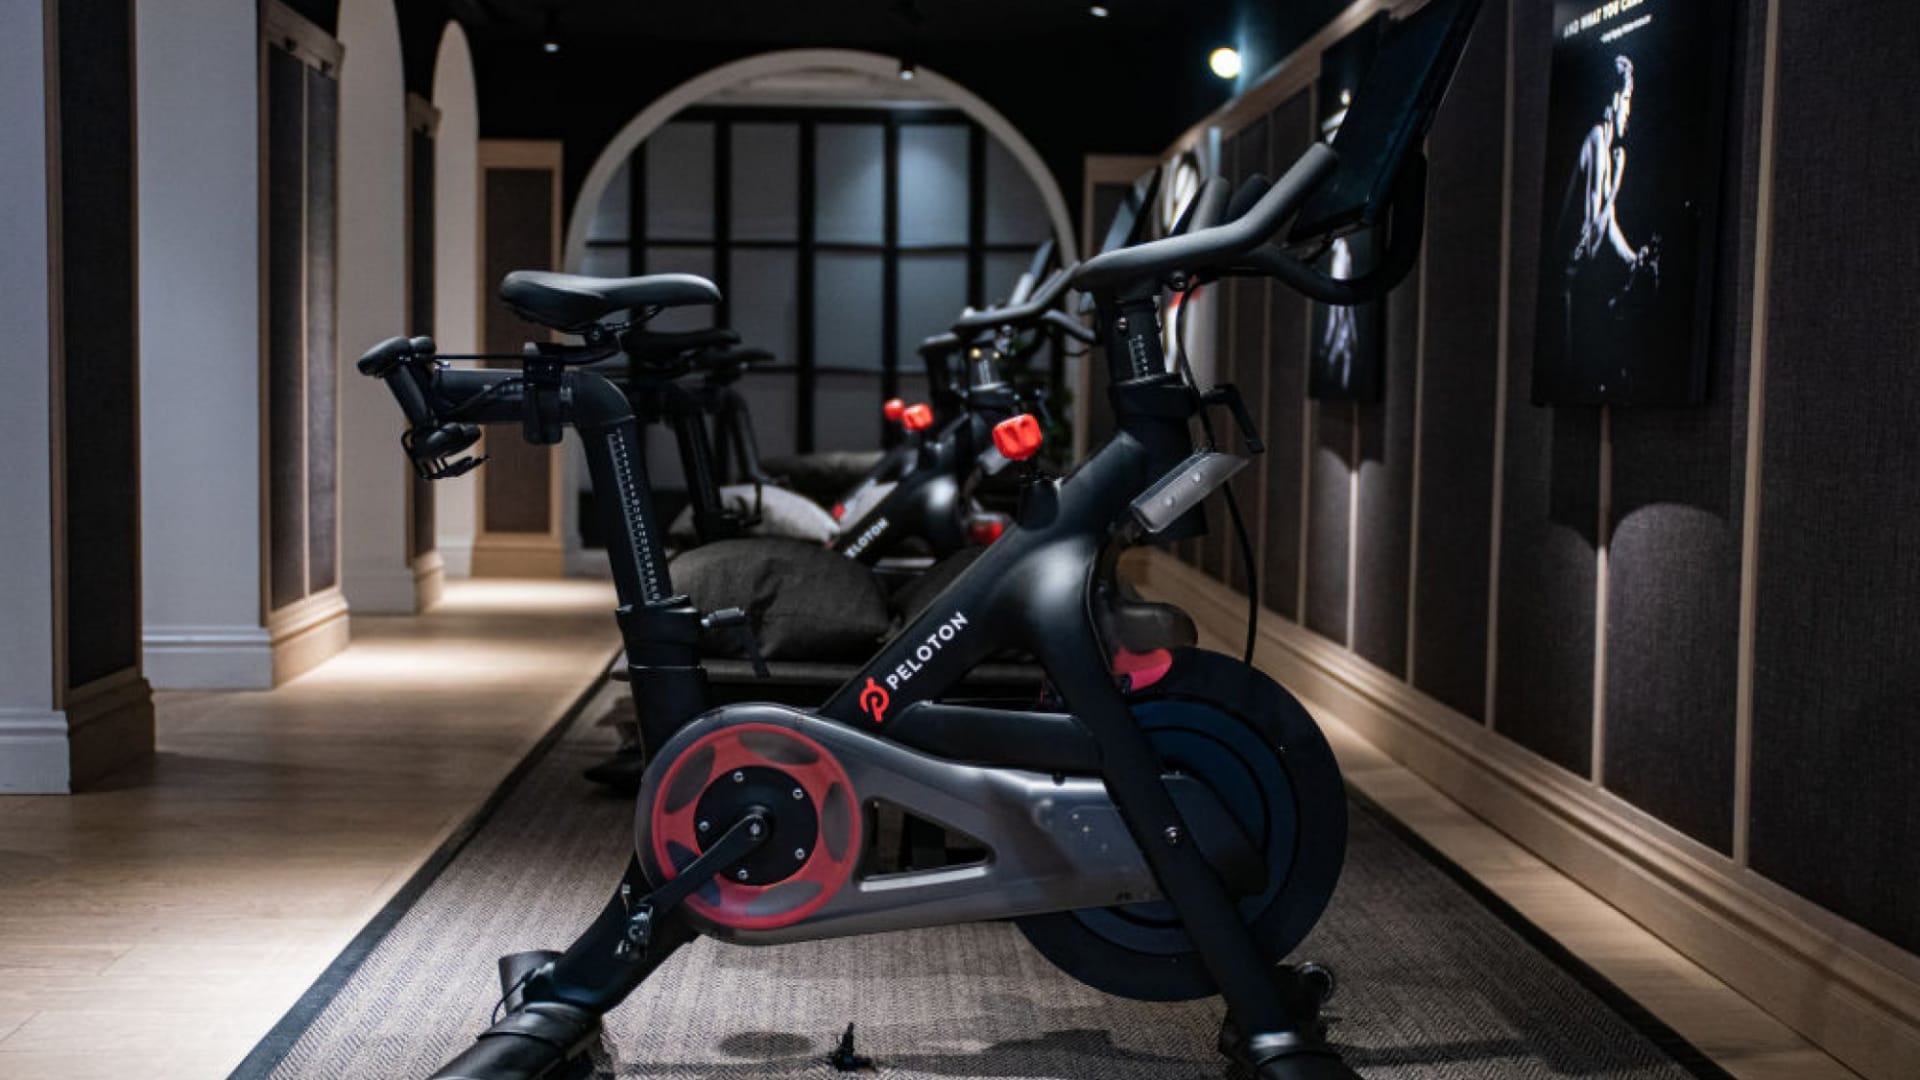 Peloton Is Having a Very Bad Week. Why Apple Should Buy the Troubled Bike-Maker